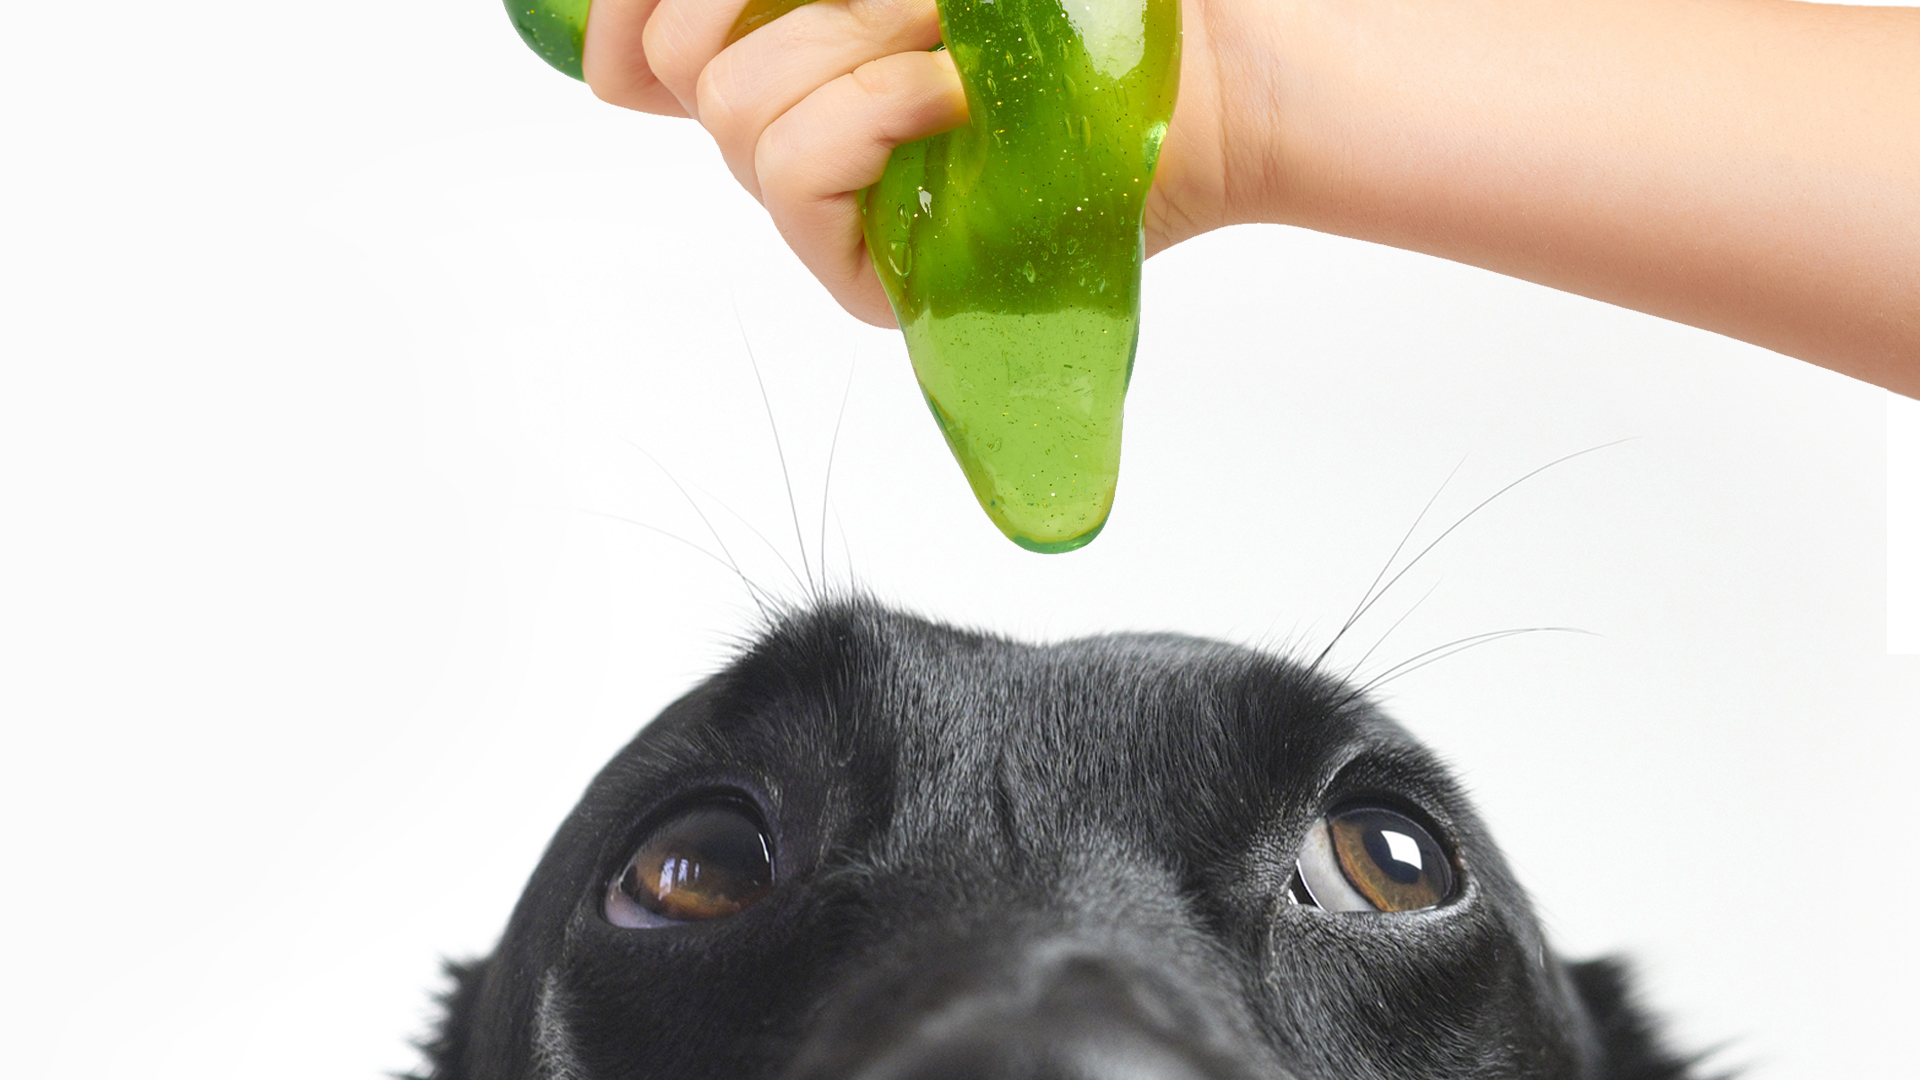 A dog about to get covered in slime